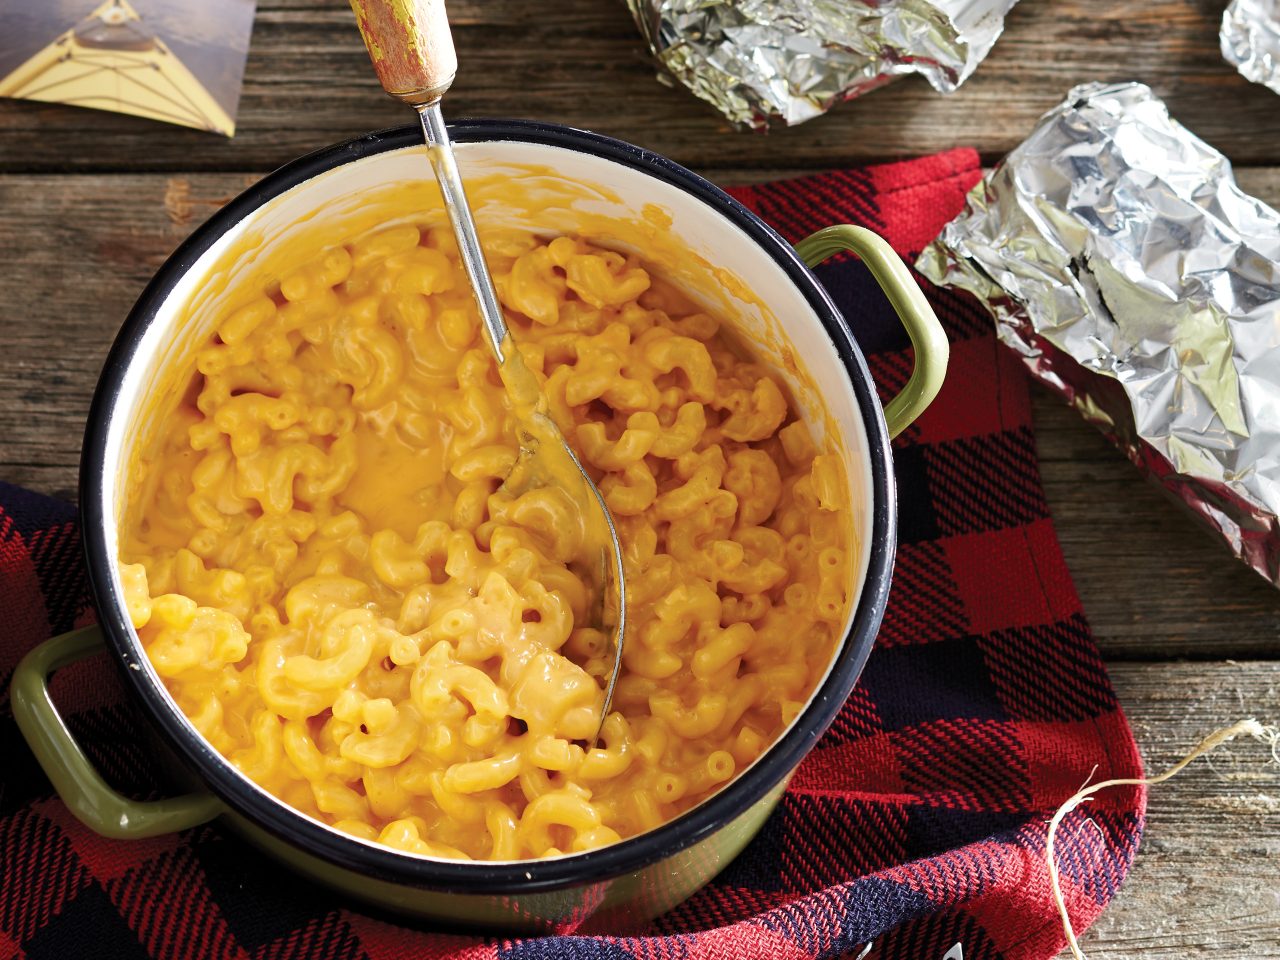 This Food Test Will Reveal If You’re an 😄 Optimist or a 😟 Pessimist macaroni and cheese1